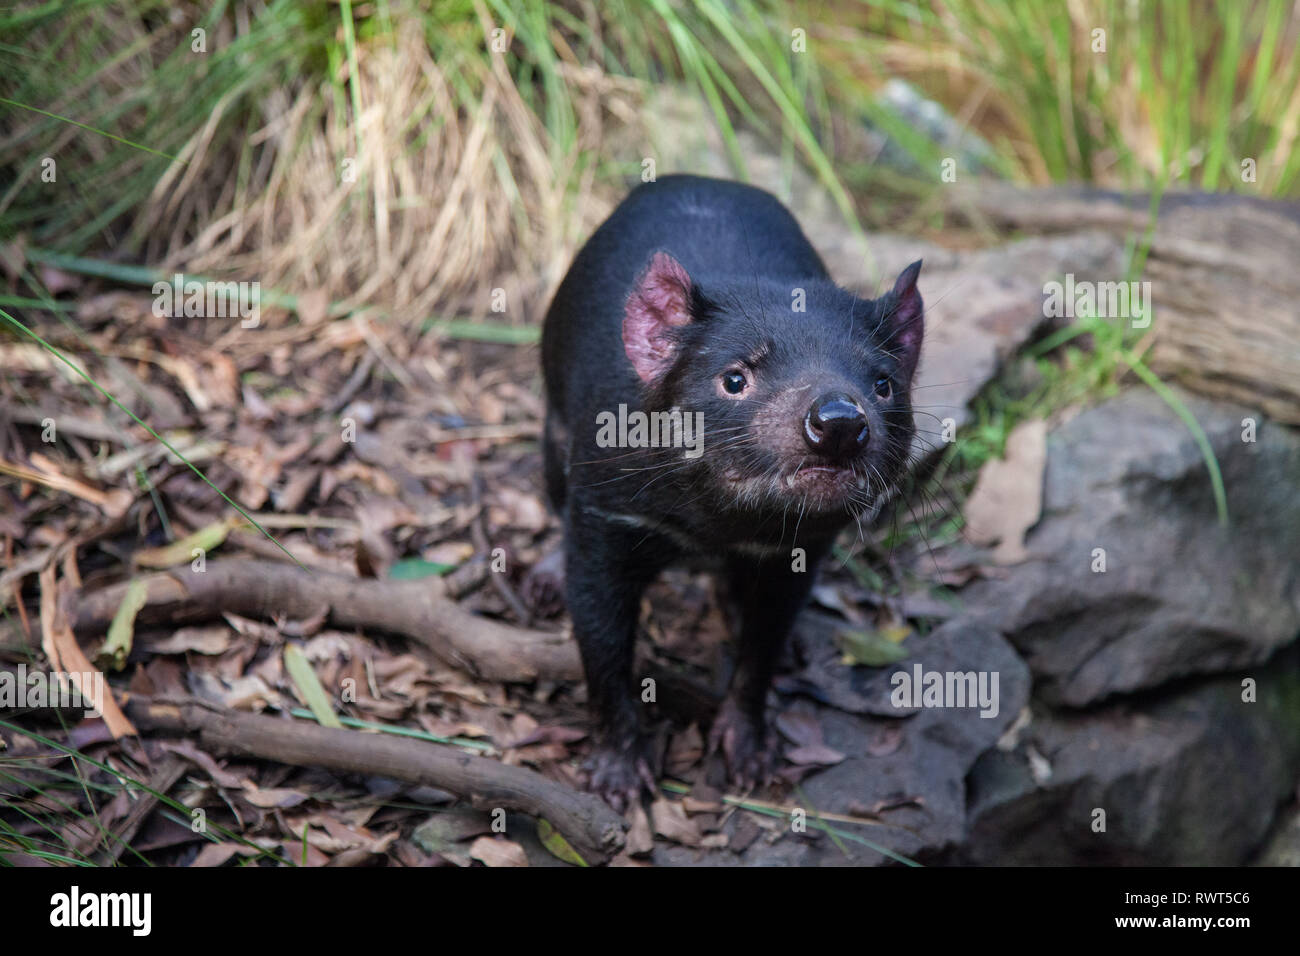 Closeup portrait of the Tasmanian devil Sarcophilus harrisii looking at the camera Stock Photo